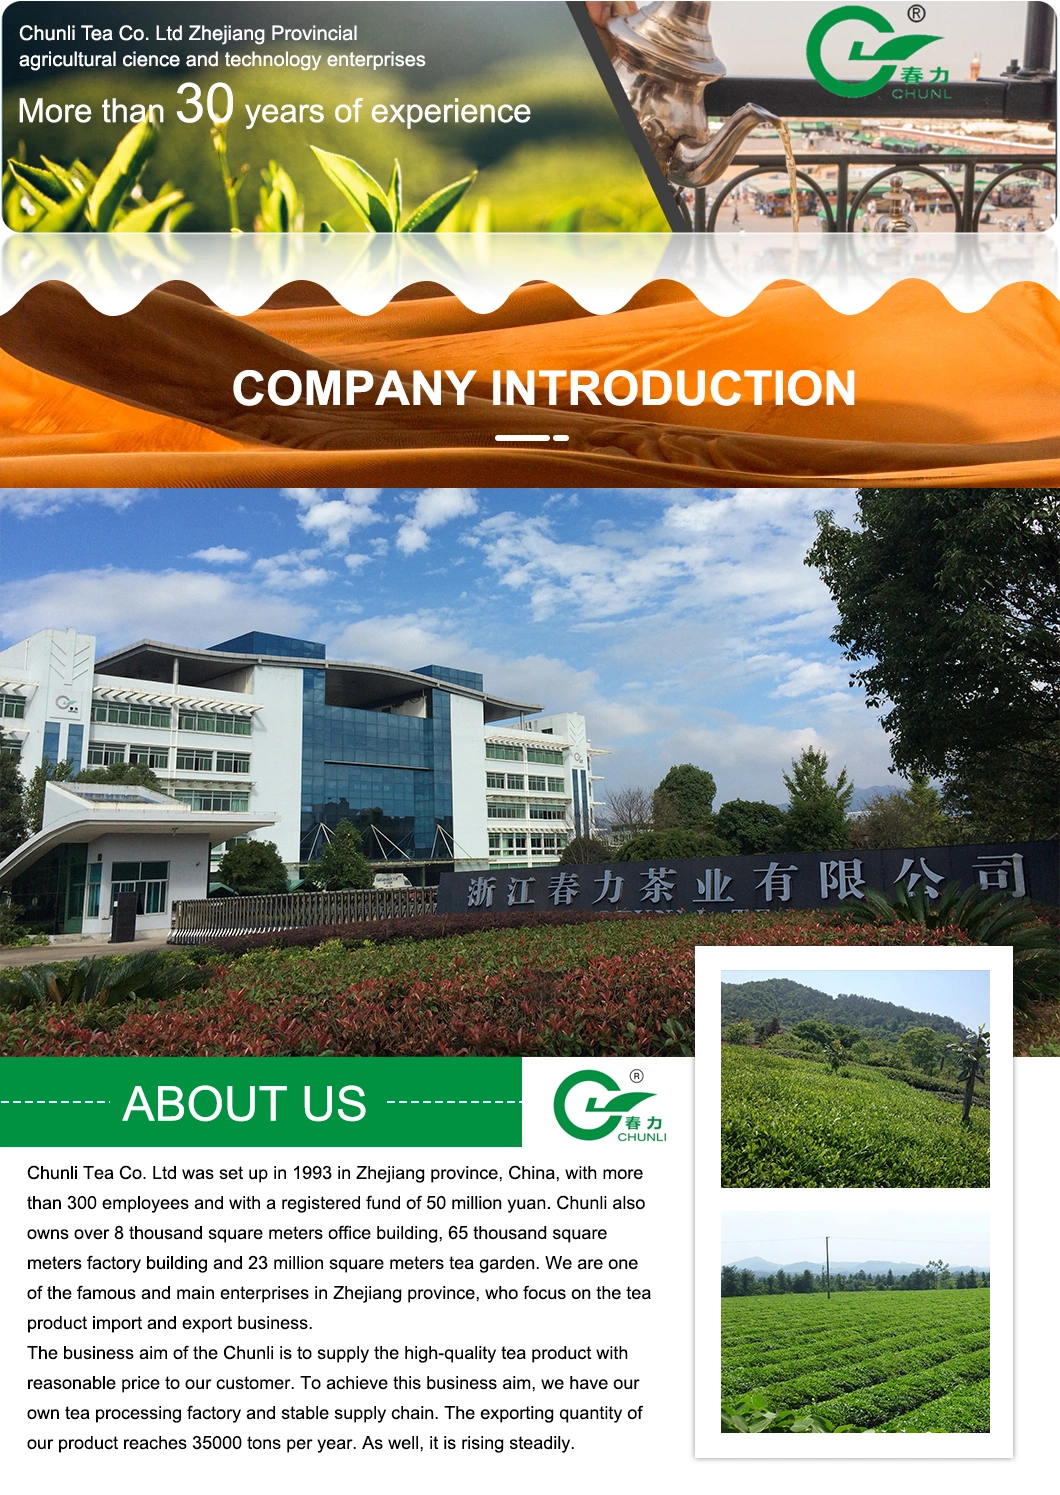 China Green Tea Good Quality Tea Low Price Factory Chunmee 8006 for Africa